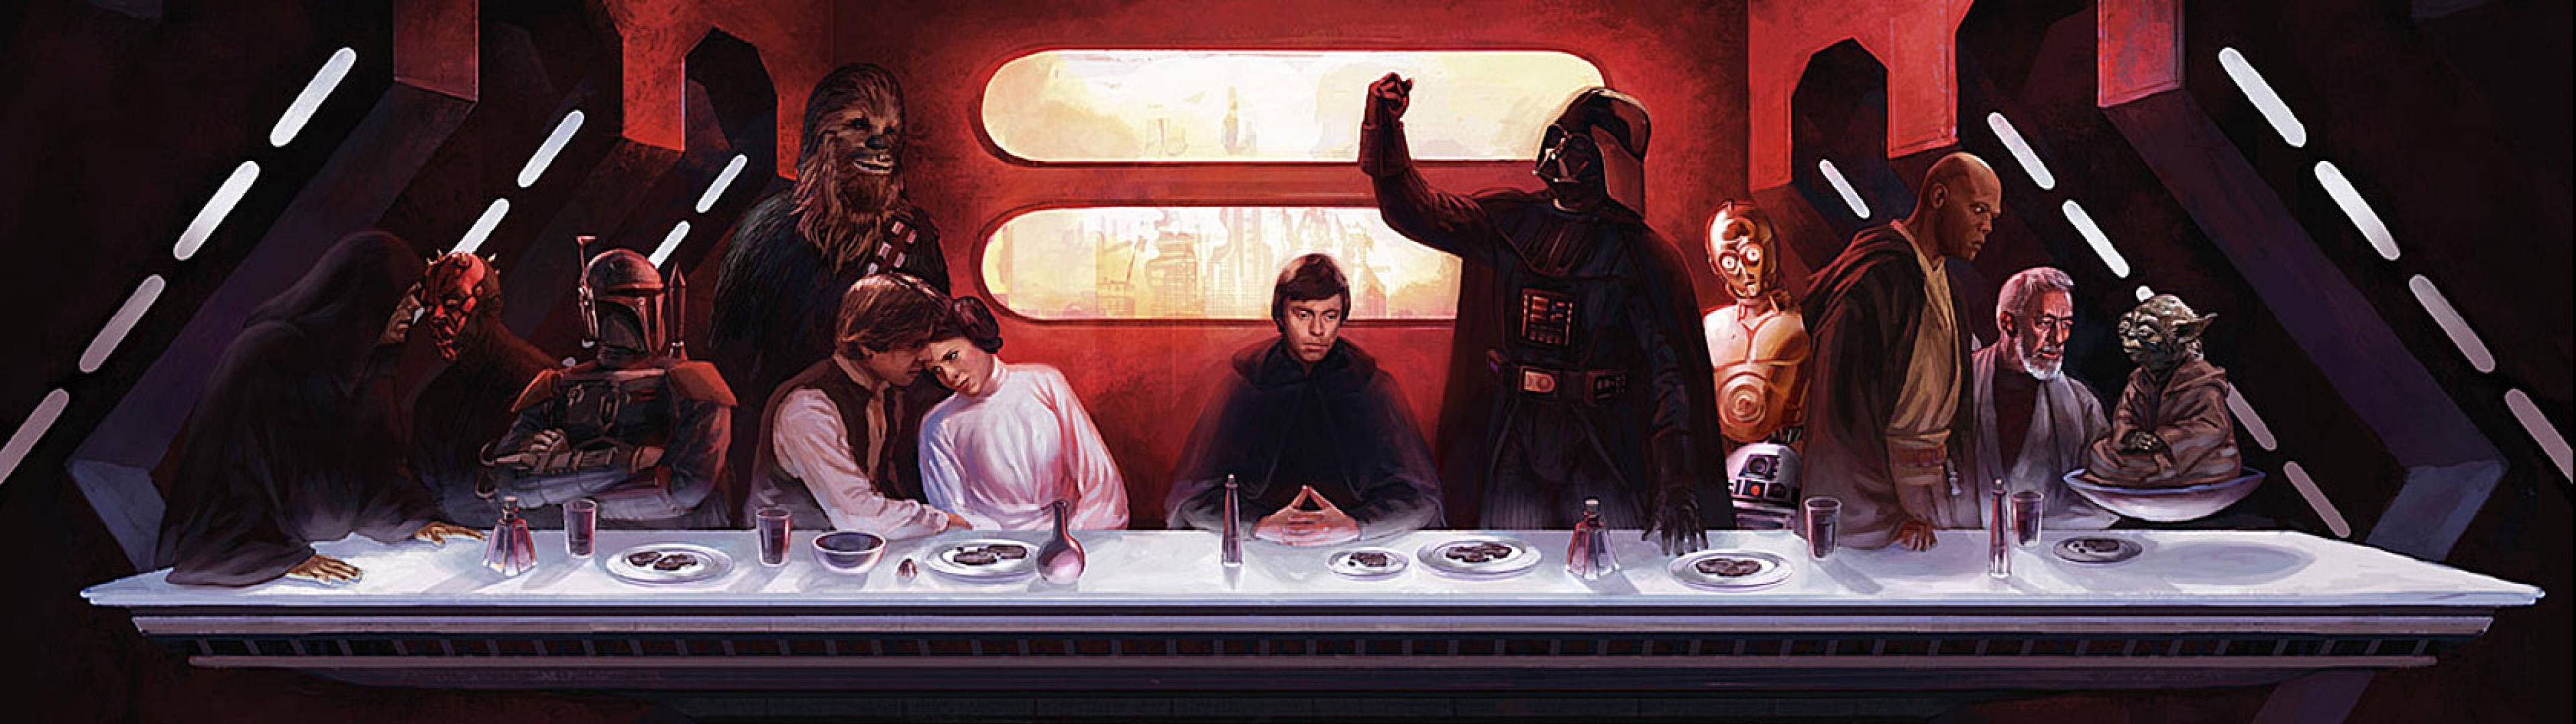 The Last Supper Star Wars Dual Screen Background